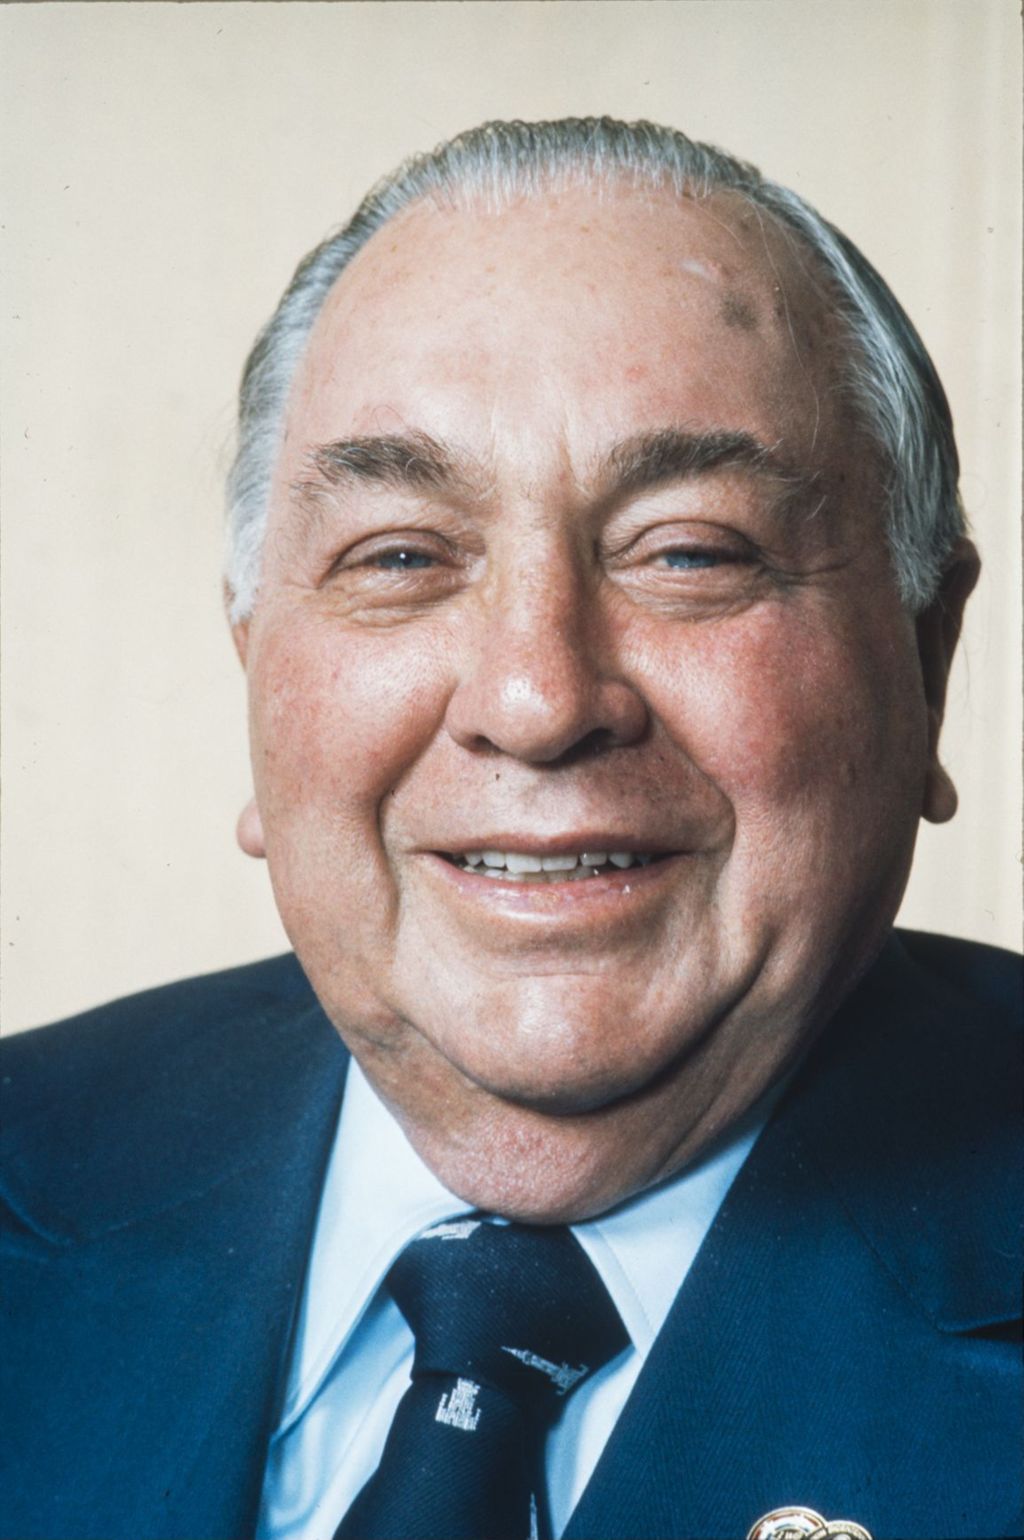 Miniature of Portraits of Richard J. Daley in a dark blue suit and tie